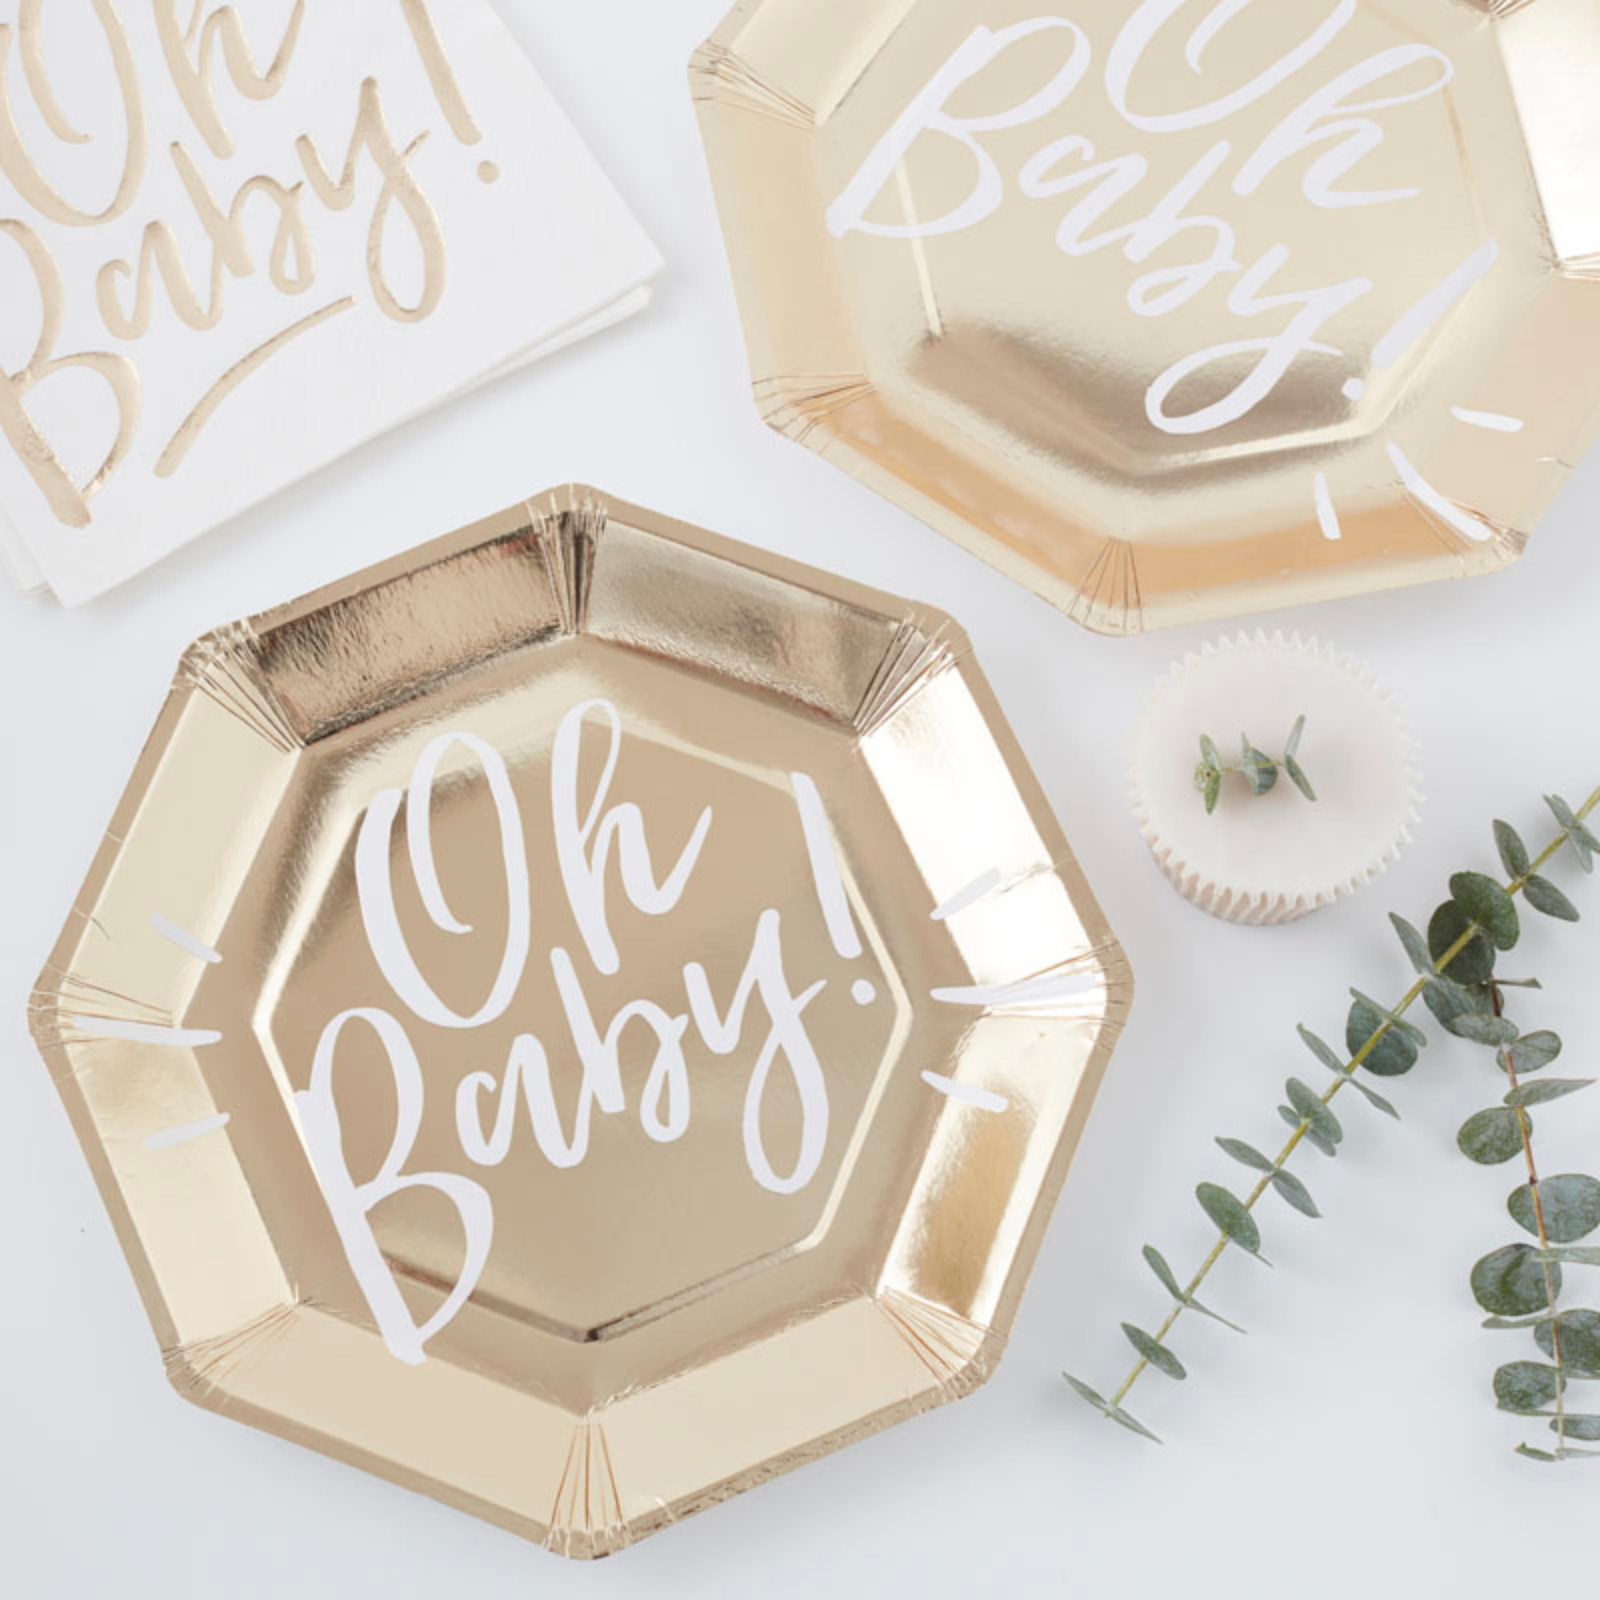 Oh Baby! – Paper Plates